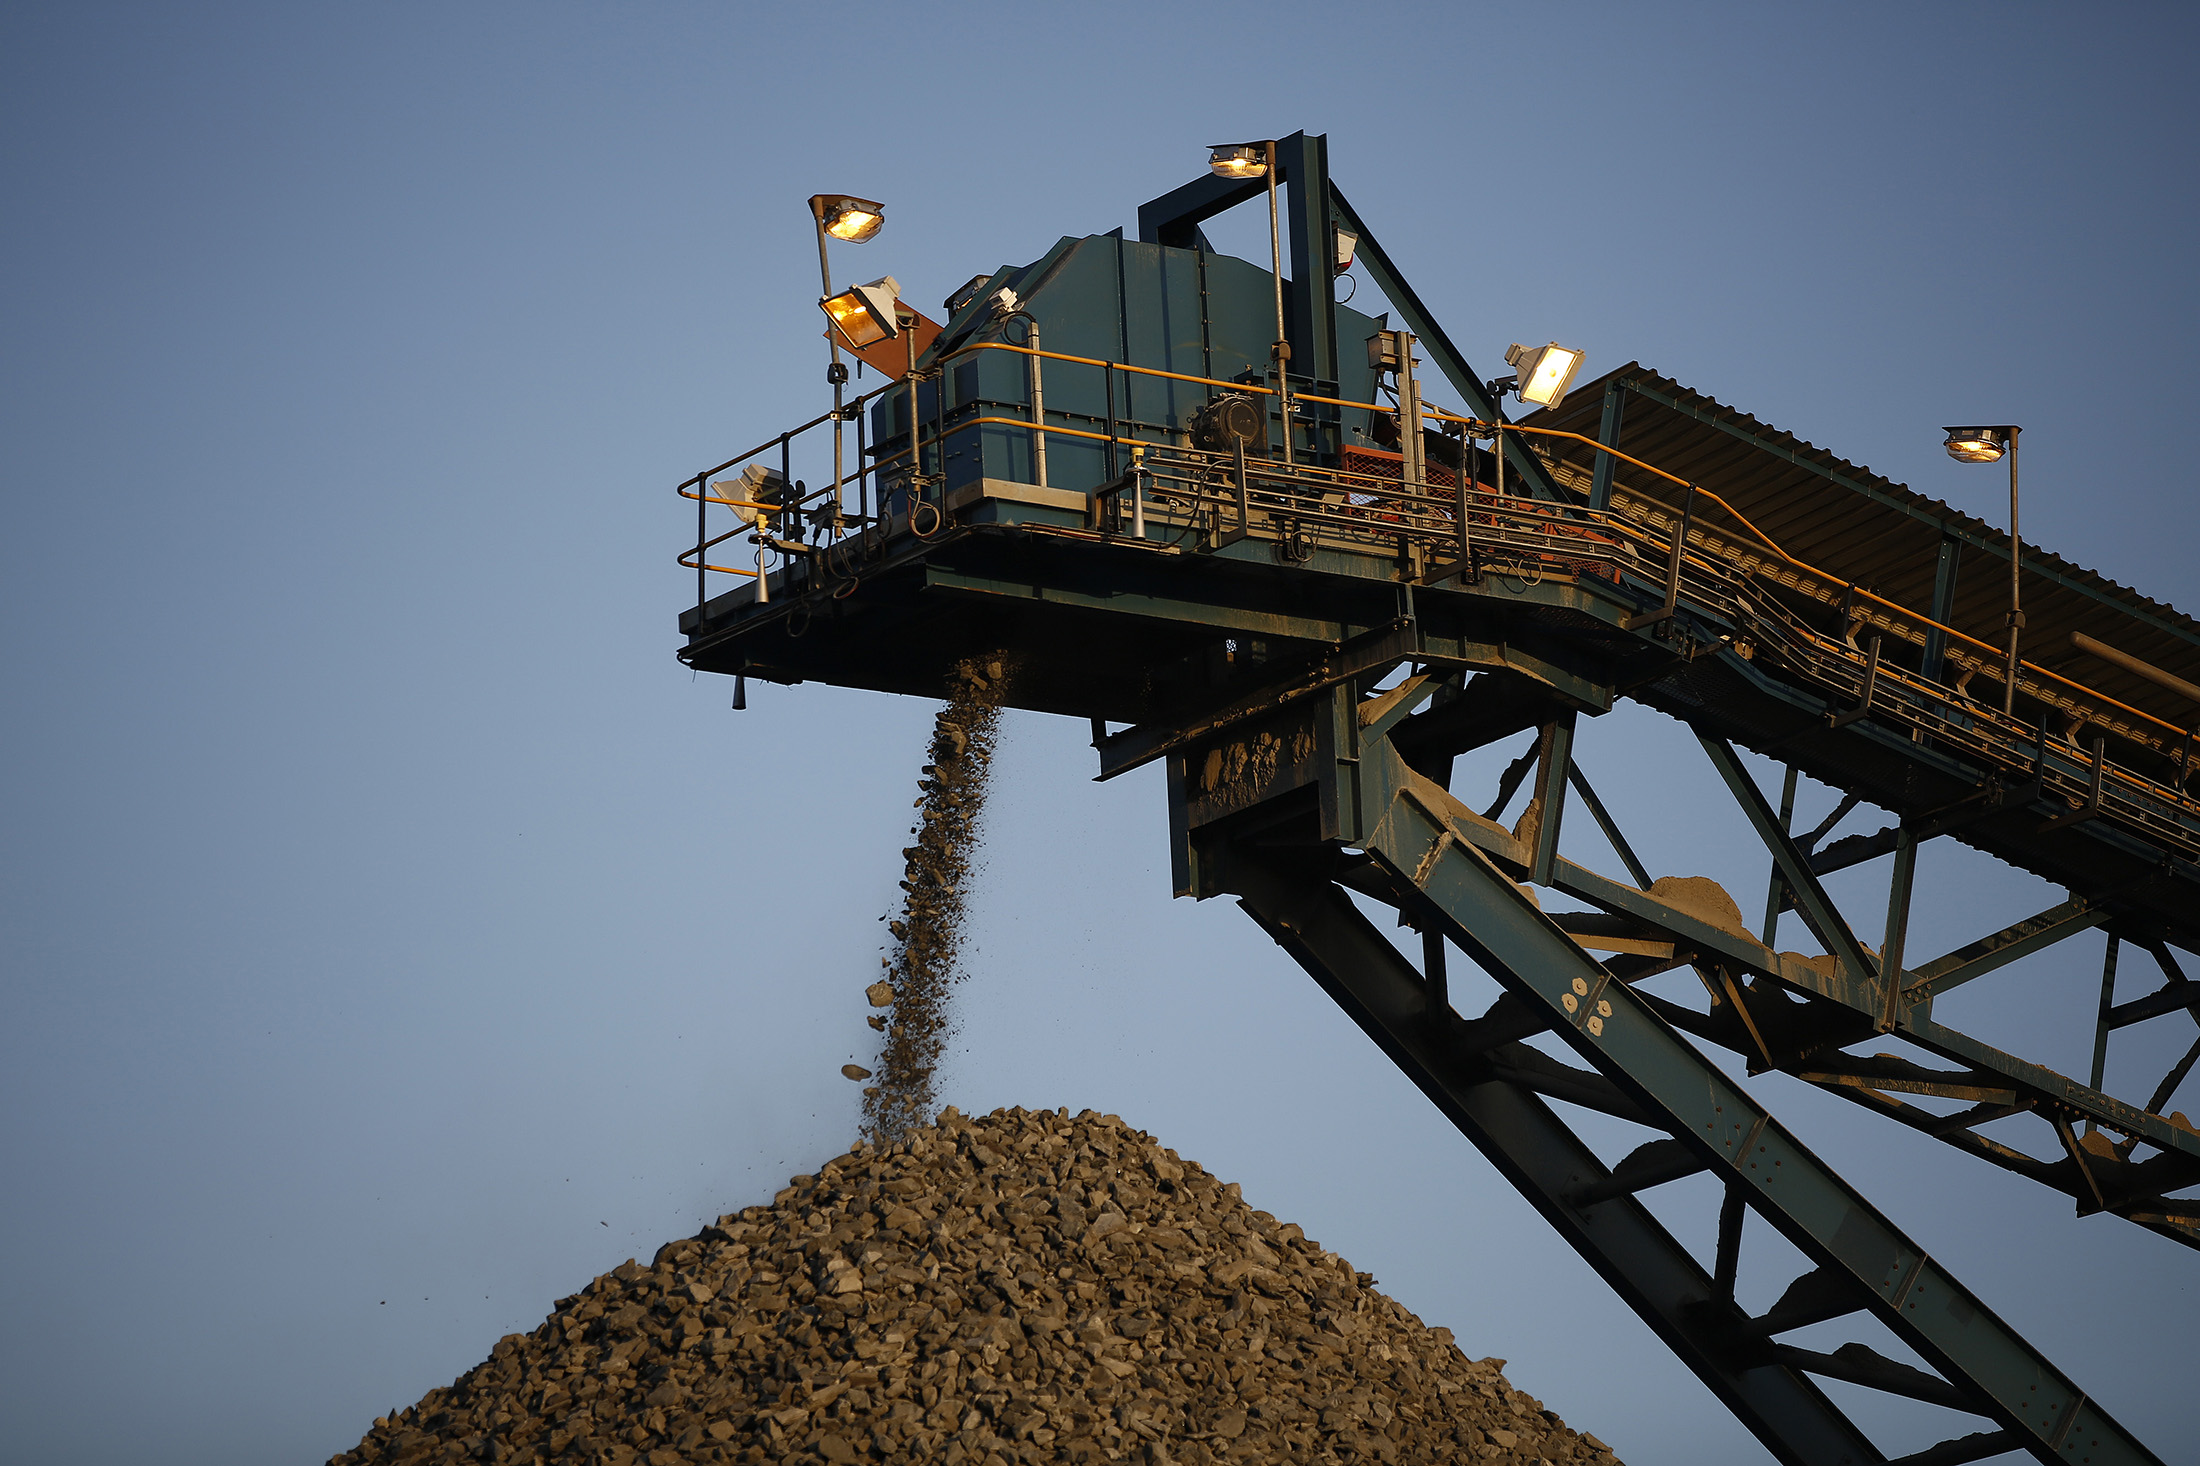 A conveyor belt deposits processed rock ore onto a dump at the Kibali gold mine in the Democratic Republic of Congo.
